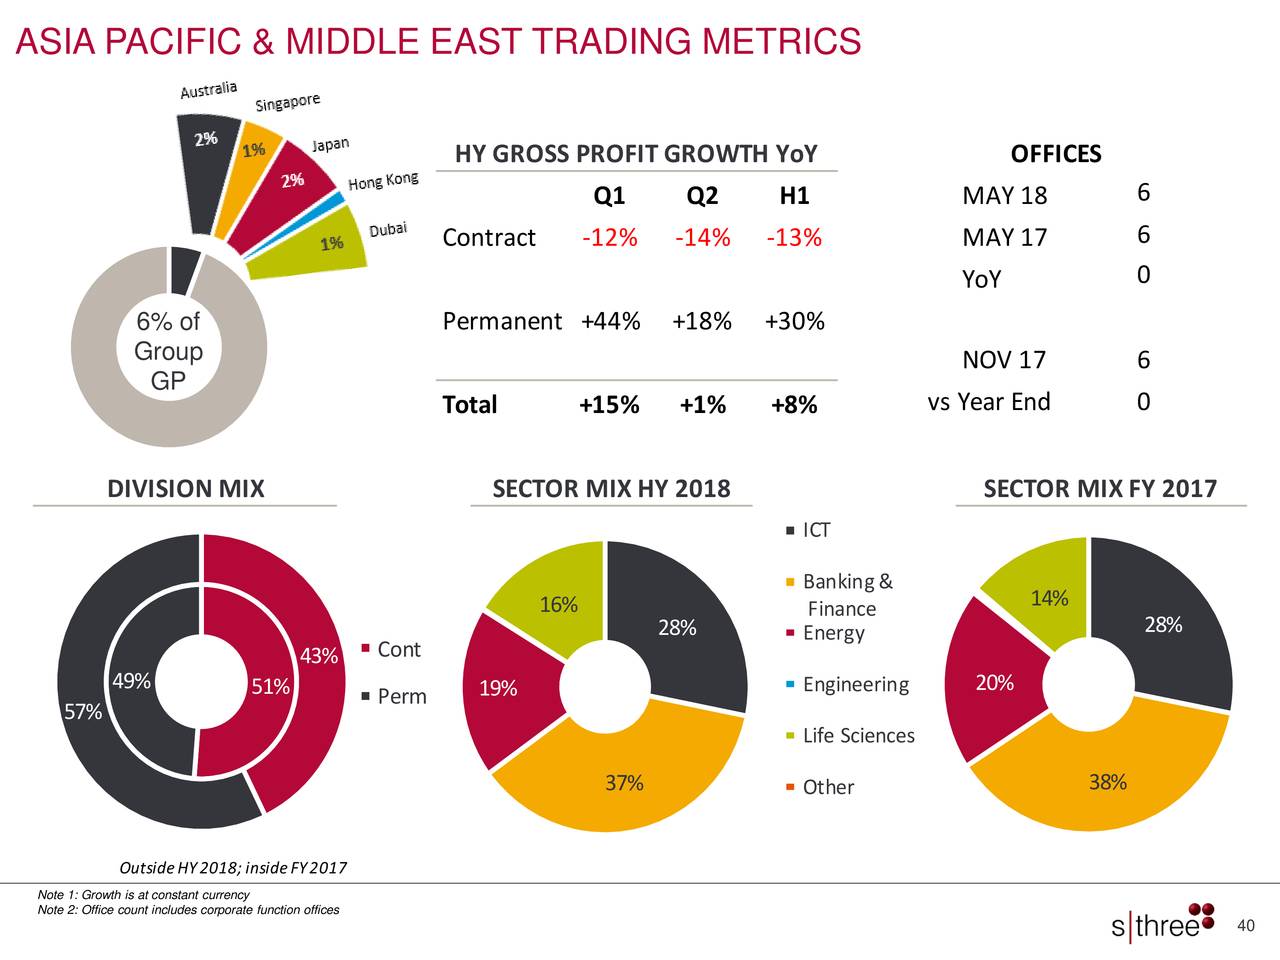 ASIA PACIFIC & MIDDLE EAST TRADING METRICS